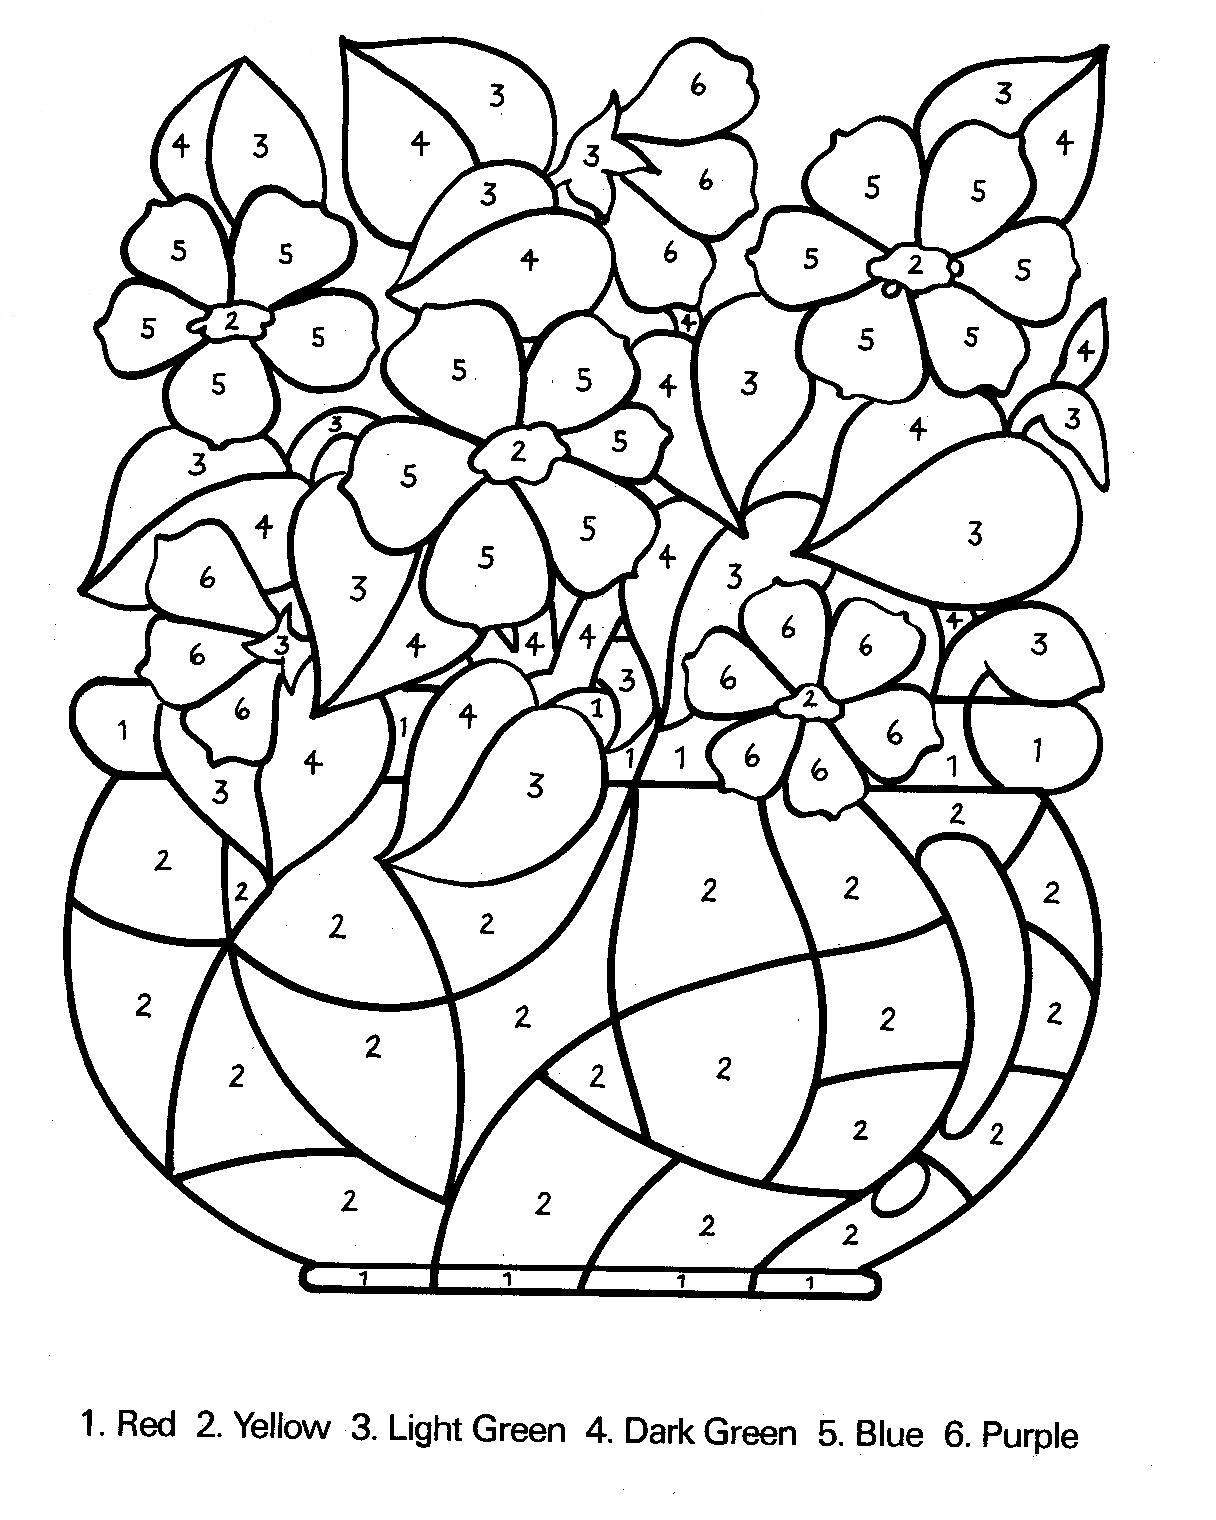 coloring pages by number | Only Coloring Pages